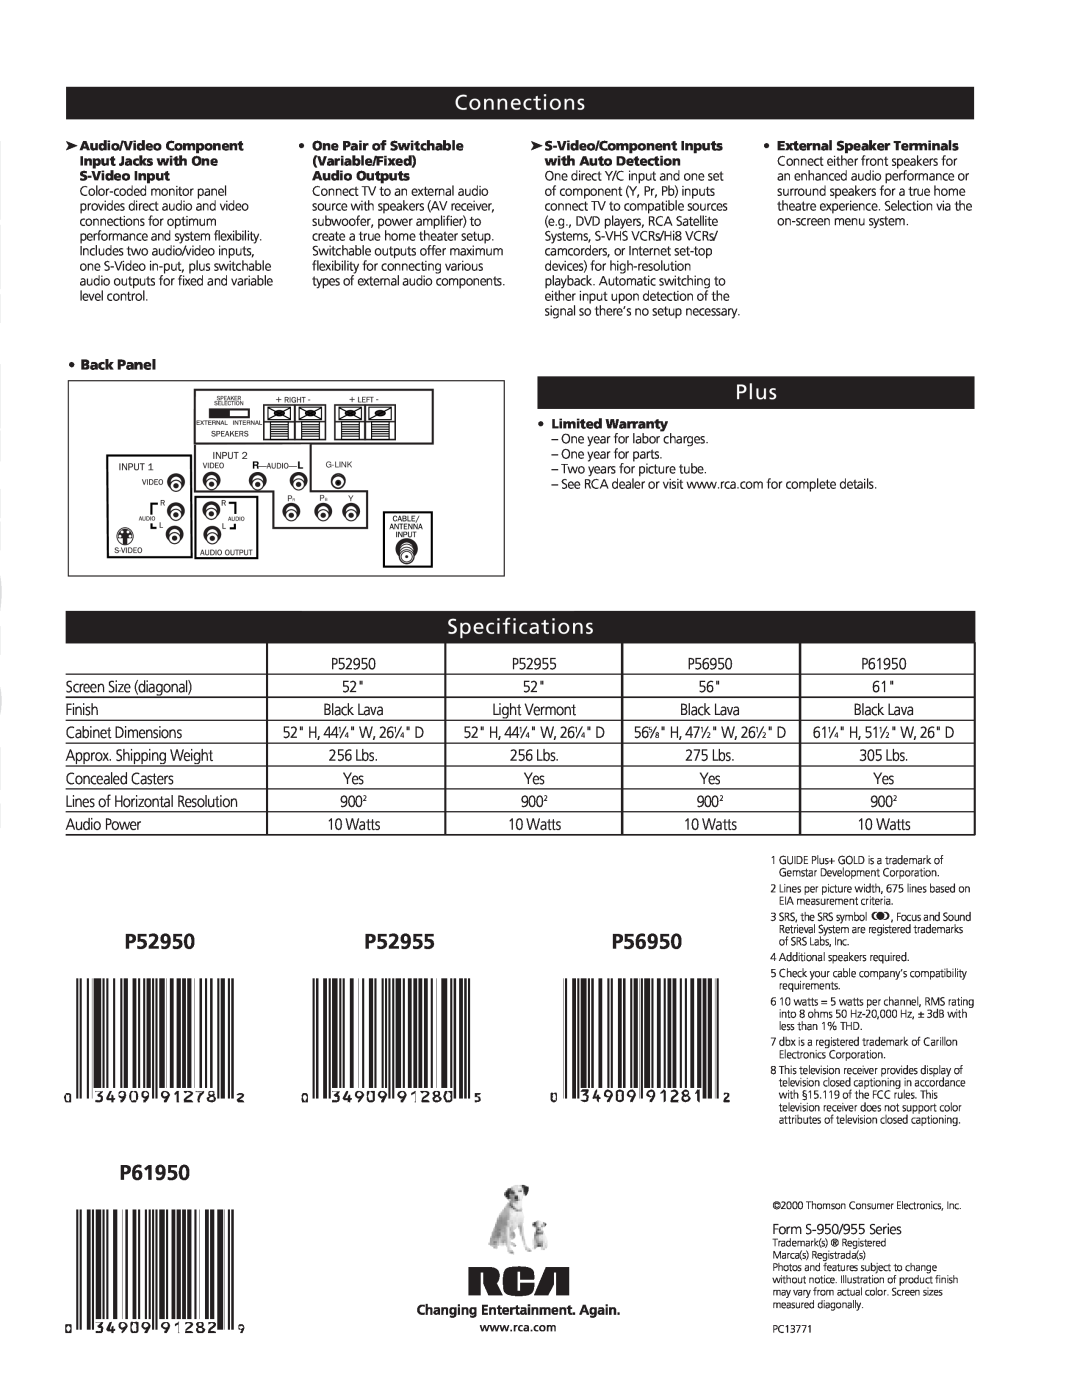 RCA P52955 manual Connections, Plus, Specifications, P52950, P56950, P61950 